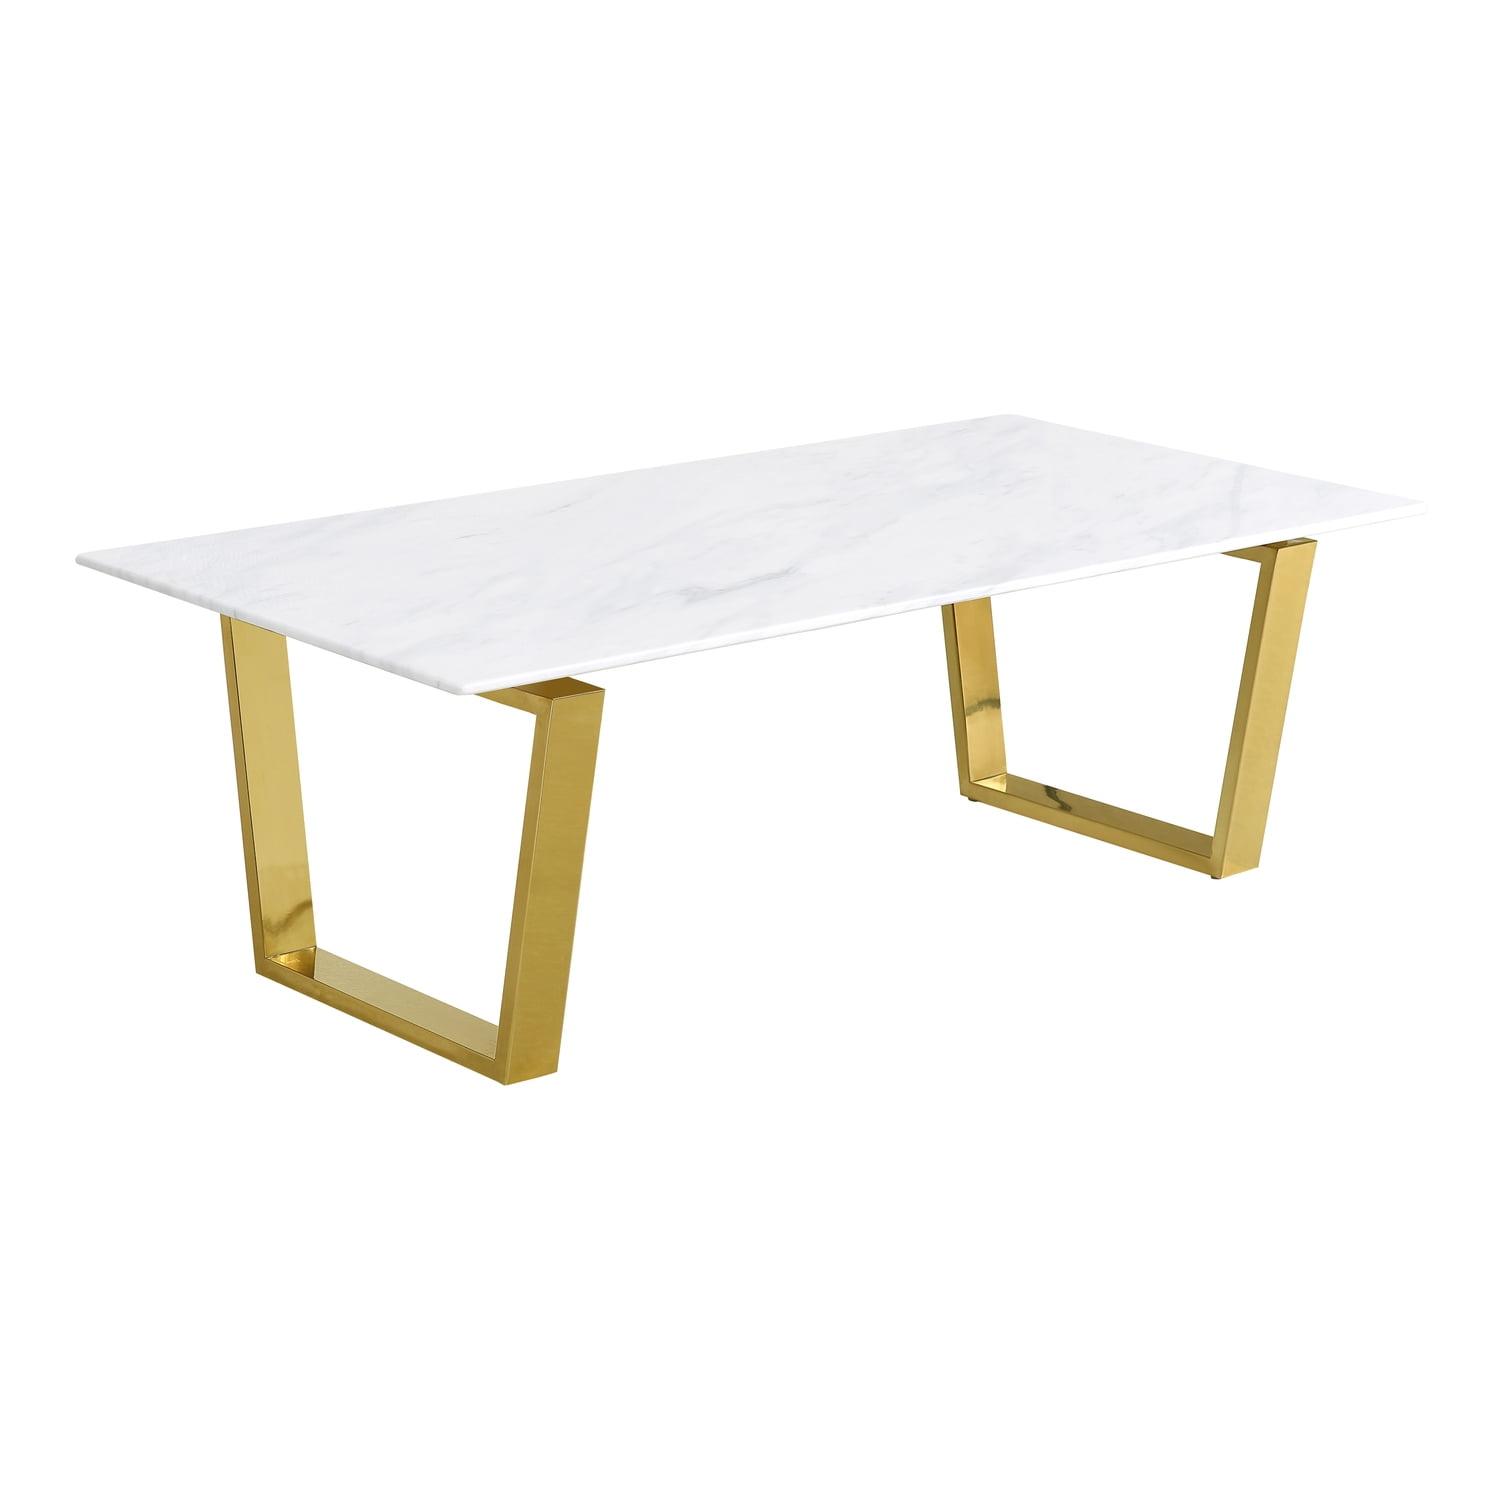 Elegant Gold and White Marble Lift-Top Coffee Table with Storage